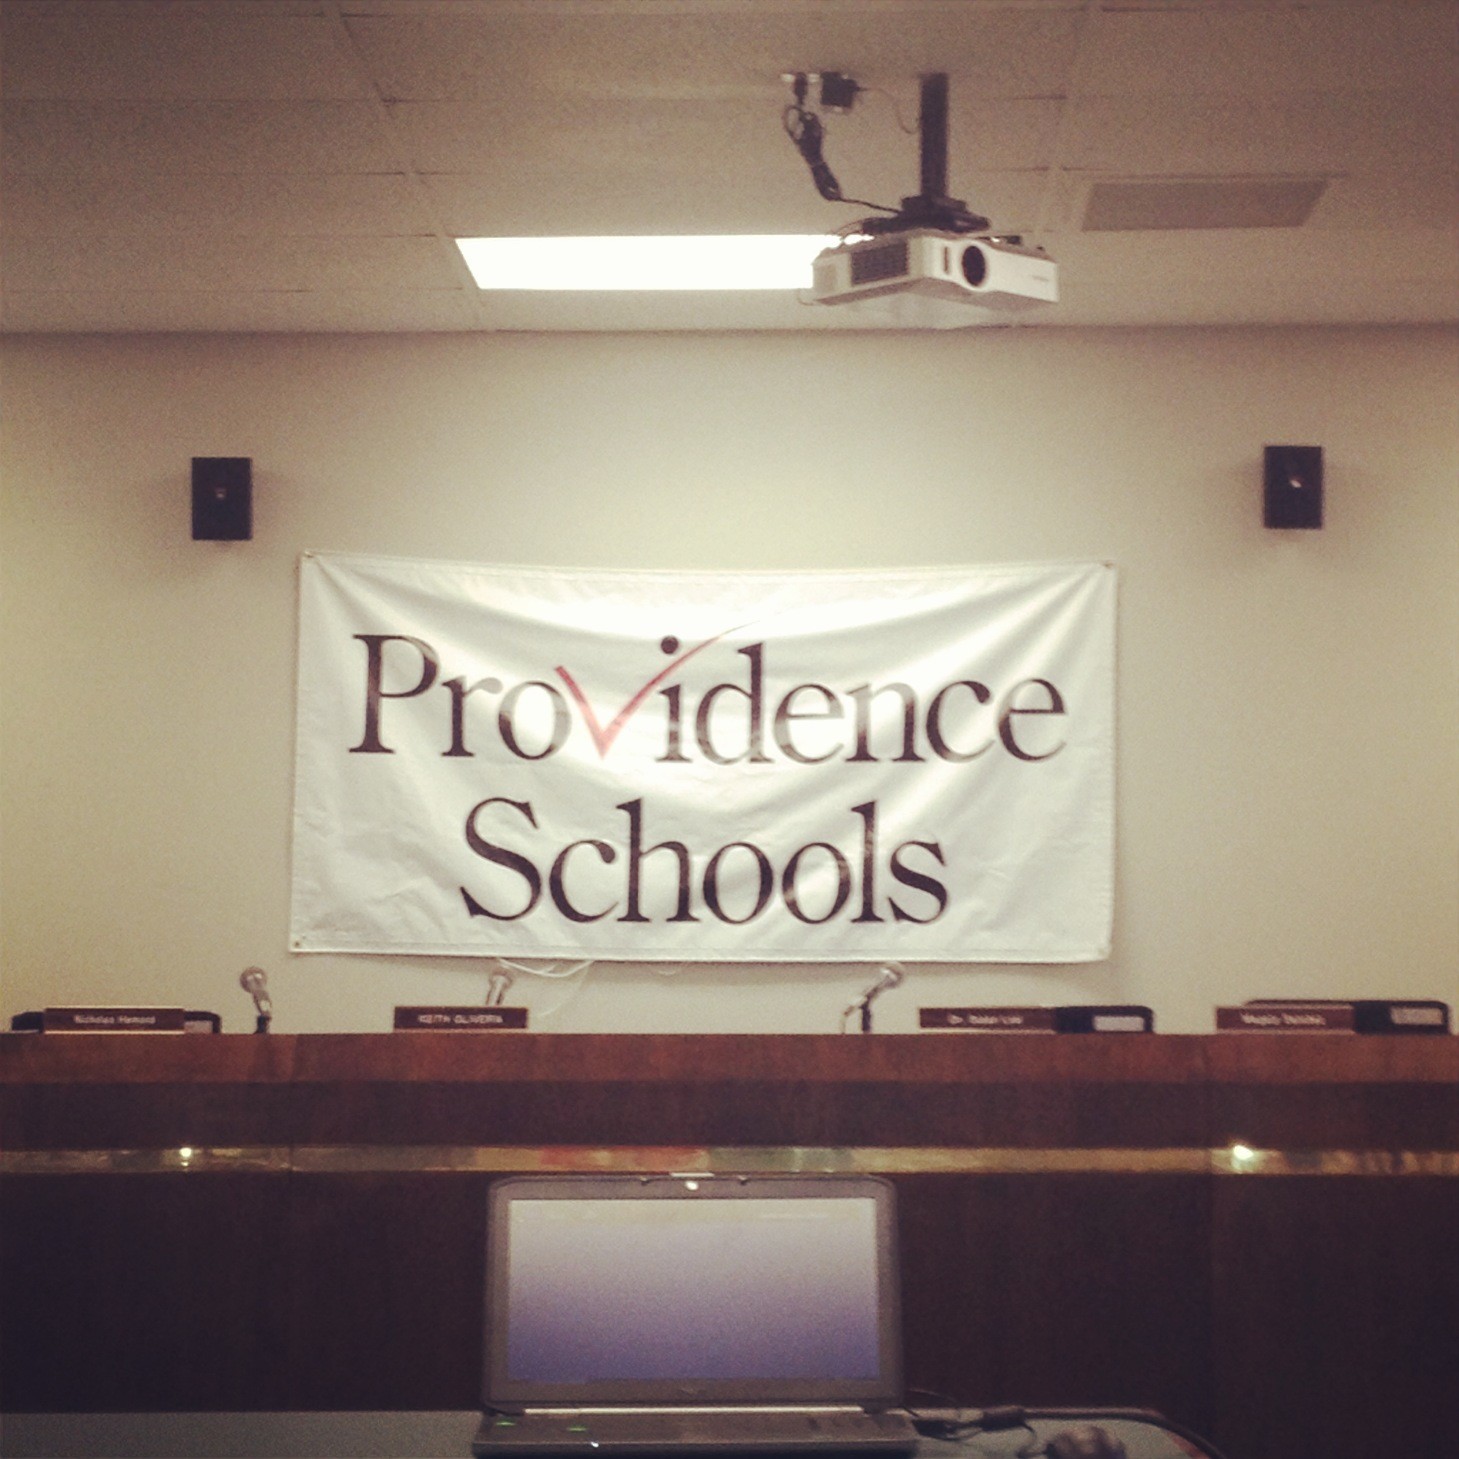 Group Calls for Resignation of Providence Schools Advisor and “End to State Takeover”